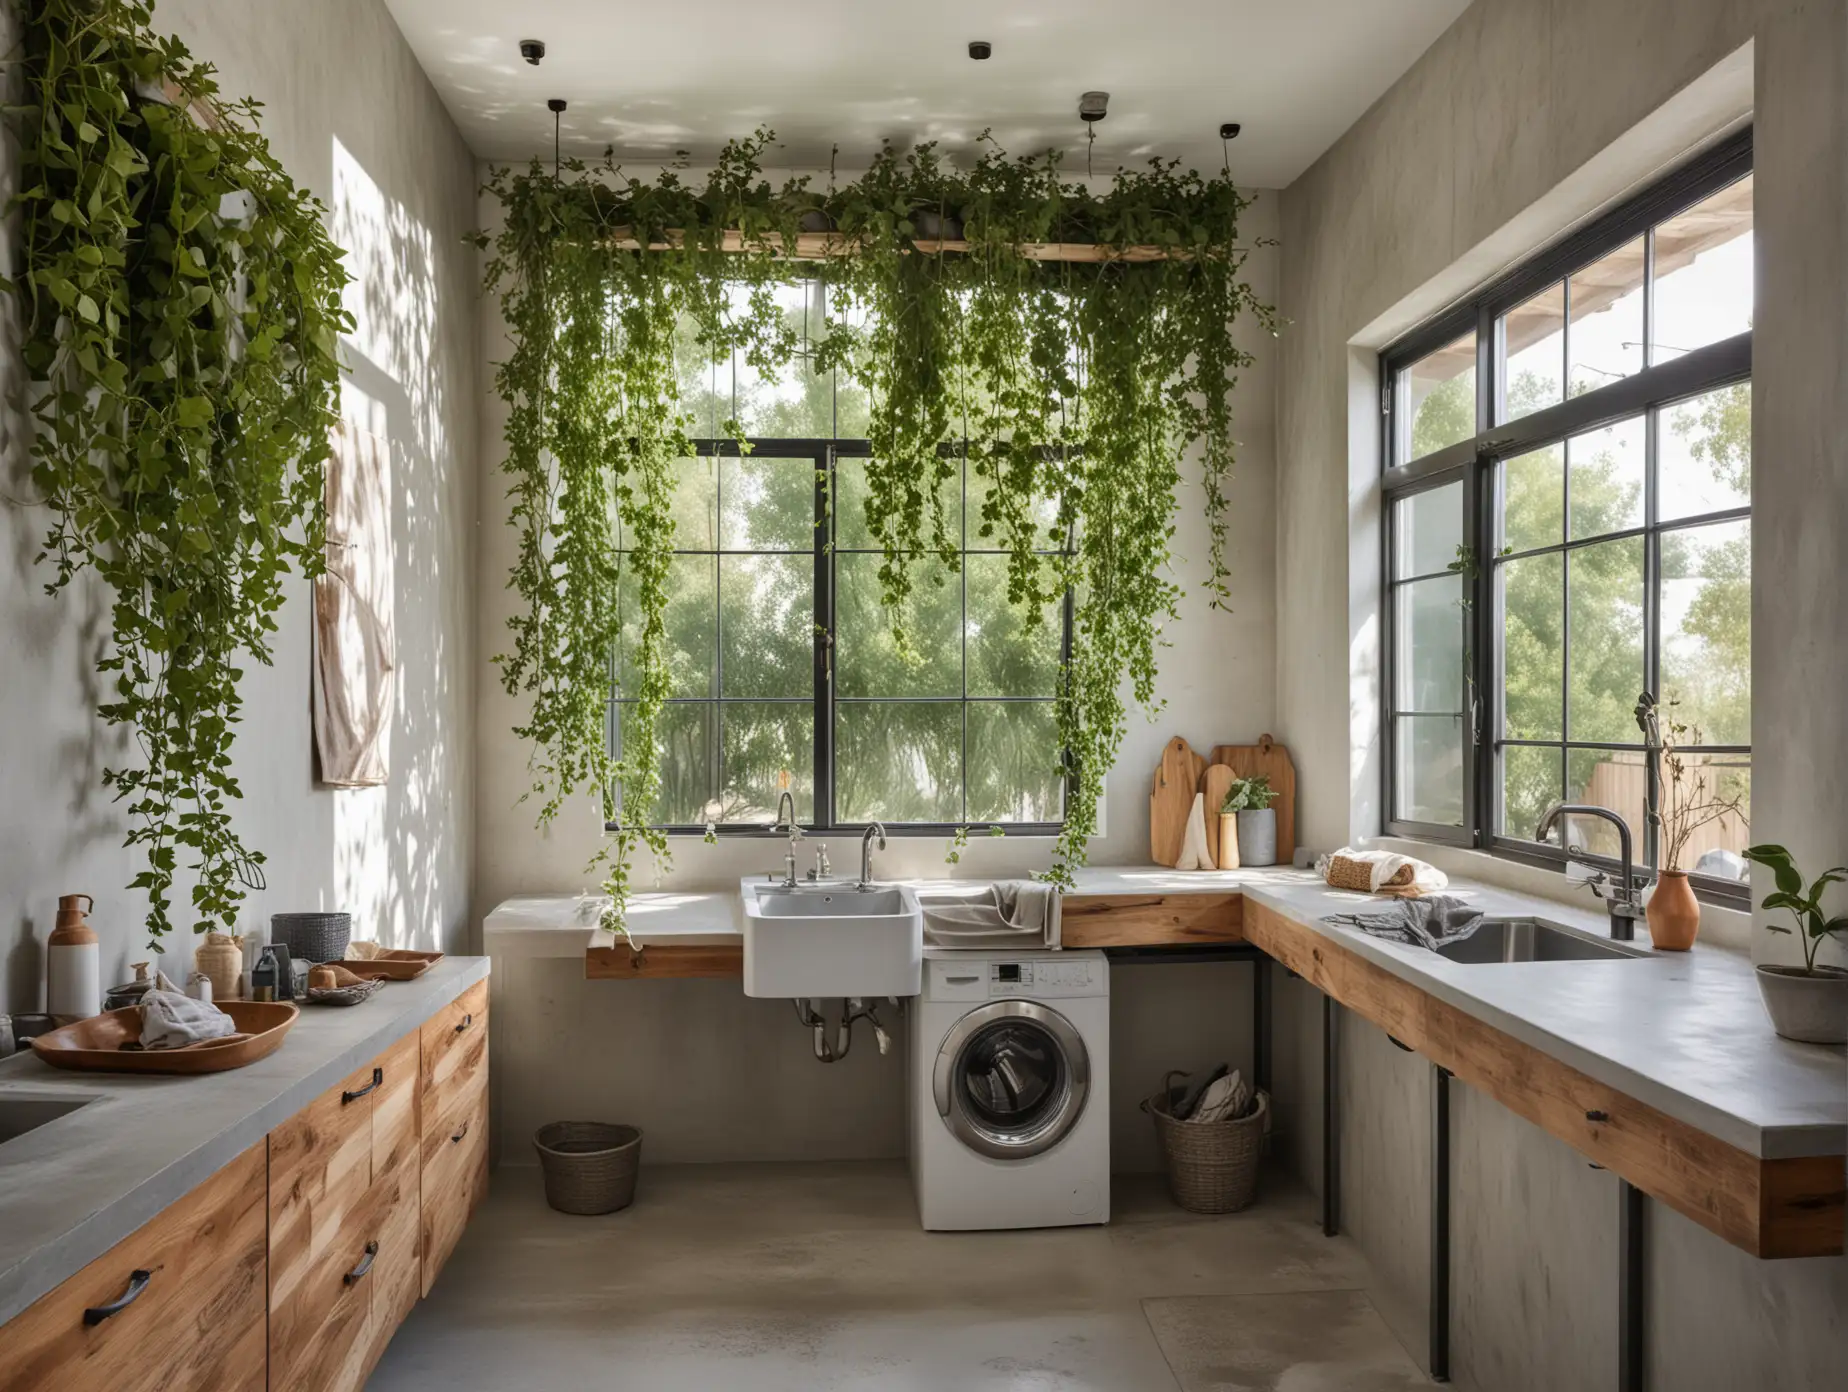 Illustrate a modern laundry room flooded with sunlight from windows overlooking a courtyard with a feature wall draped in climbing vines, featuring polished concrete sink basins, wooden sticks decor adorning the walls, and retractable hanging lines for air drying laundry.